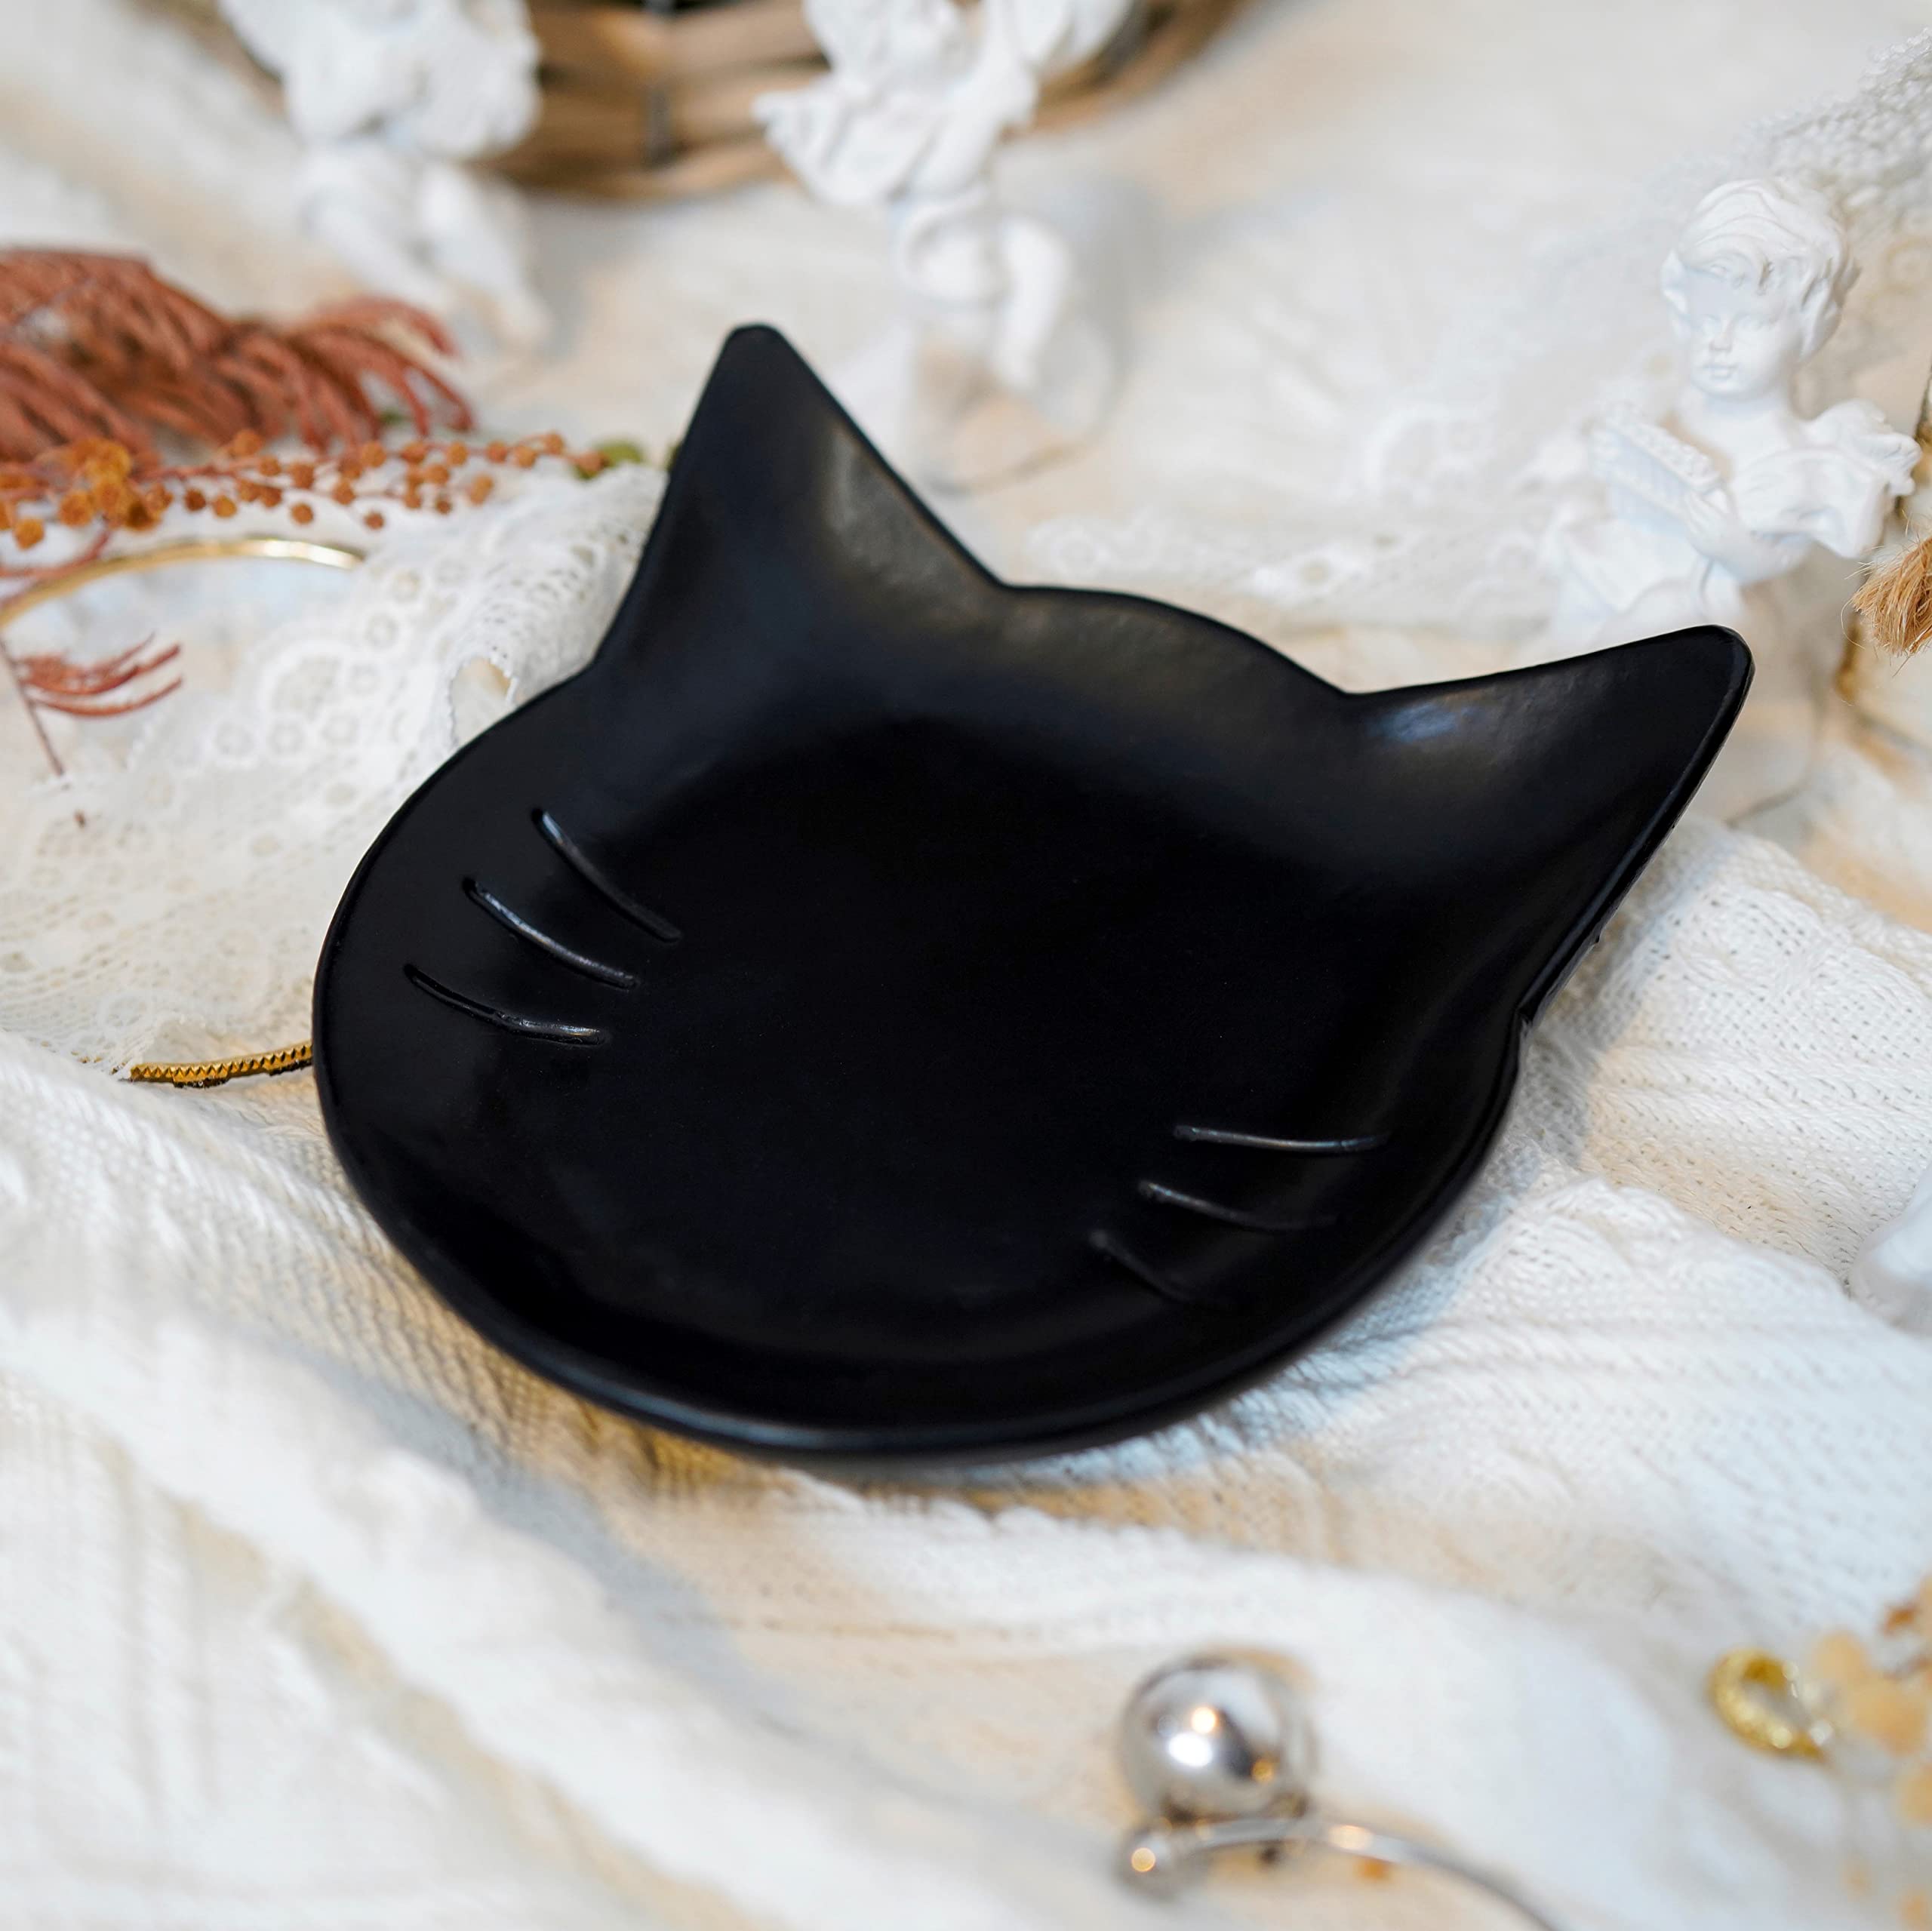 SOFFEE DESIGN Light Resin Jewelry Tray Black Cat Head Shape Storage for Ring/Earring/Necklace/Trinket Dish, Suitable for Entryway/Side Cabinet/Bedside Table/Washstand/Dressing Table